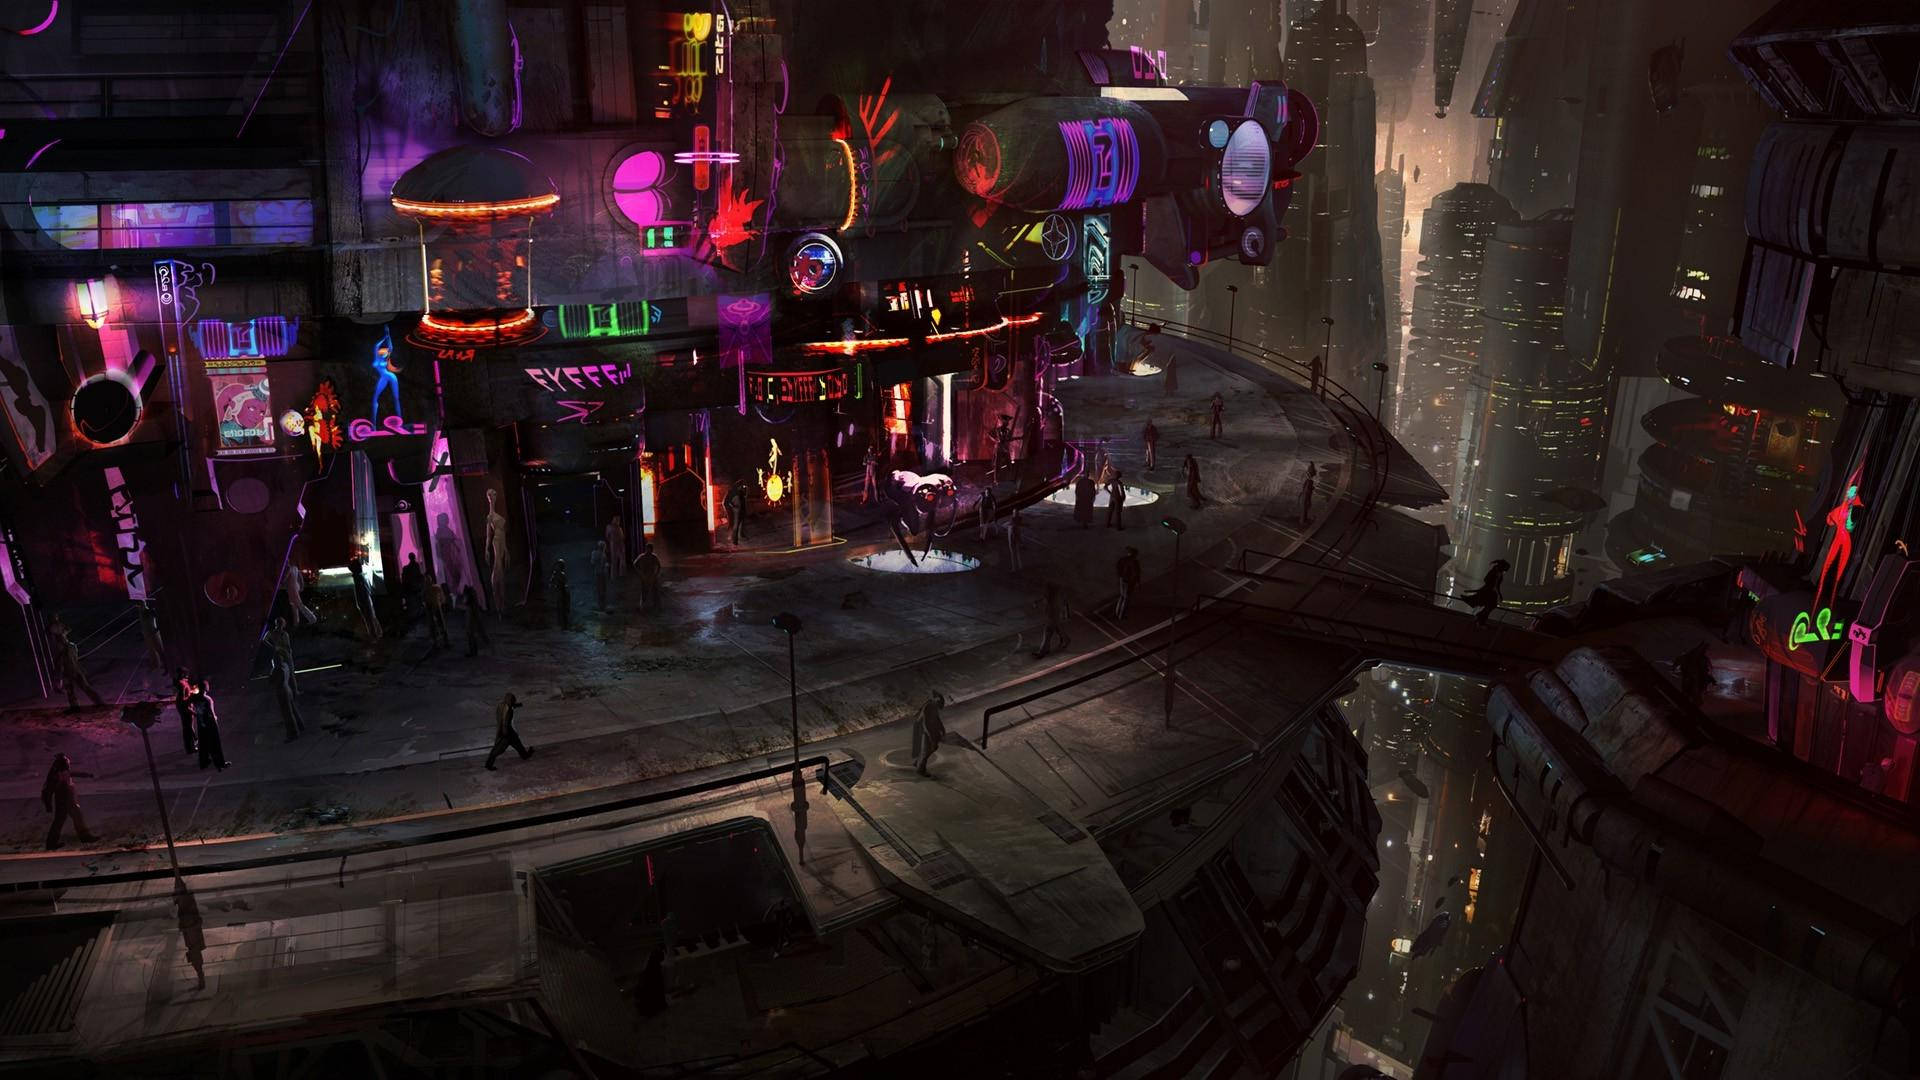 Uncommon Place In The City Of Cyberpunk Wallpaper